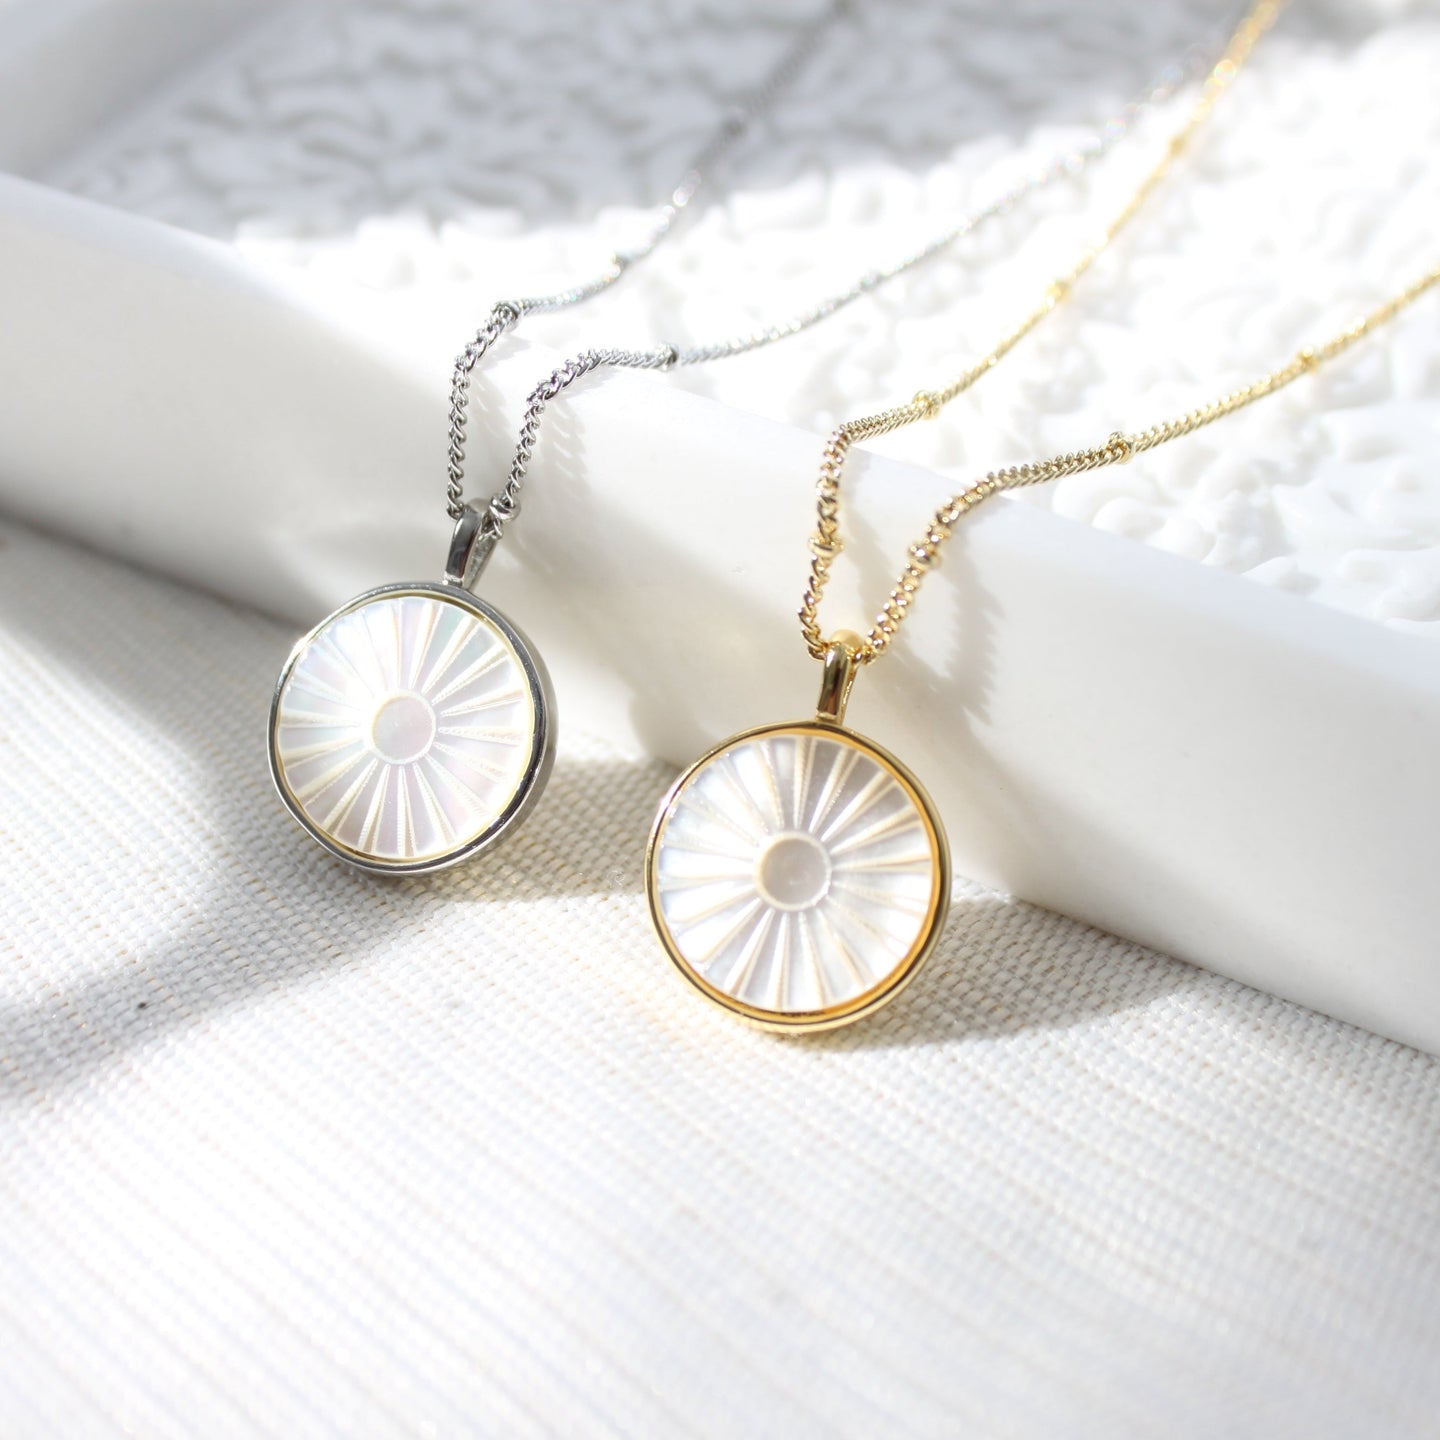 The Sun Etched Mother of Pearl Pendant Necklace